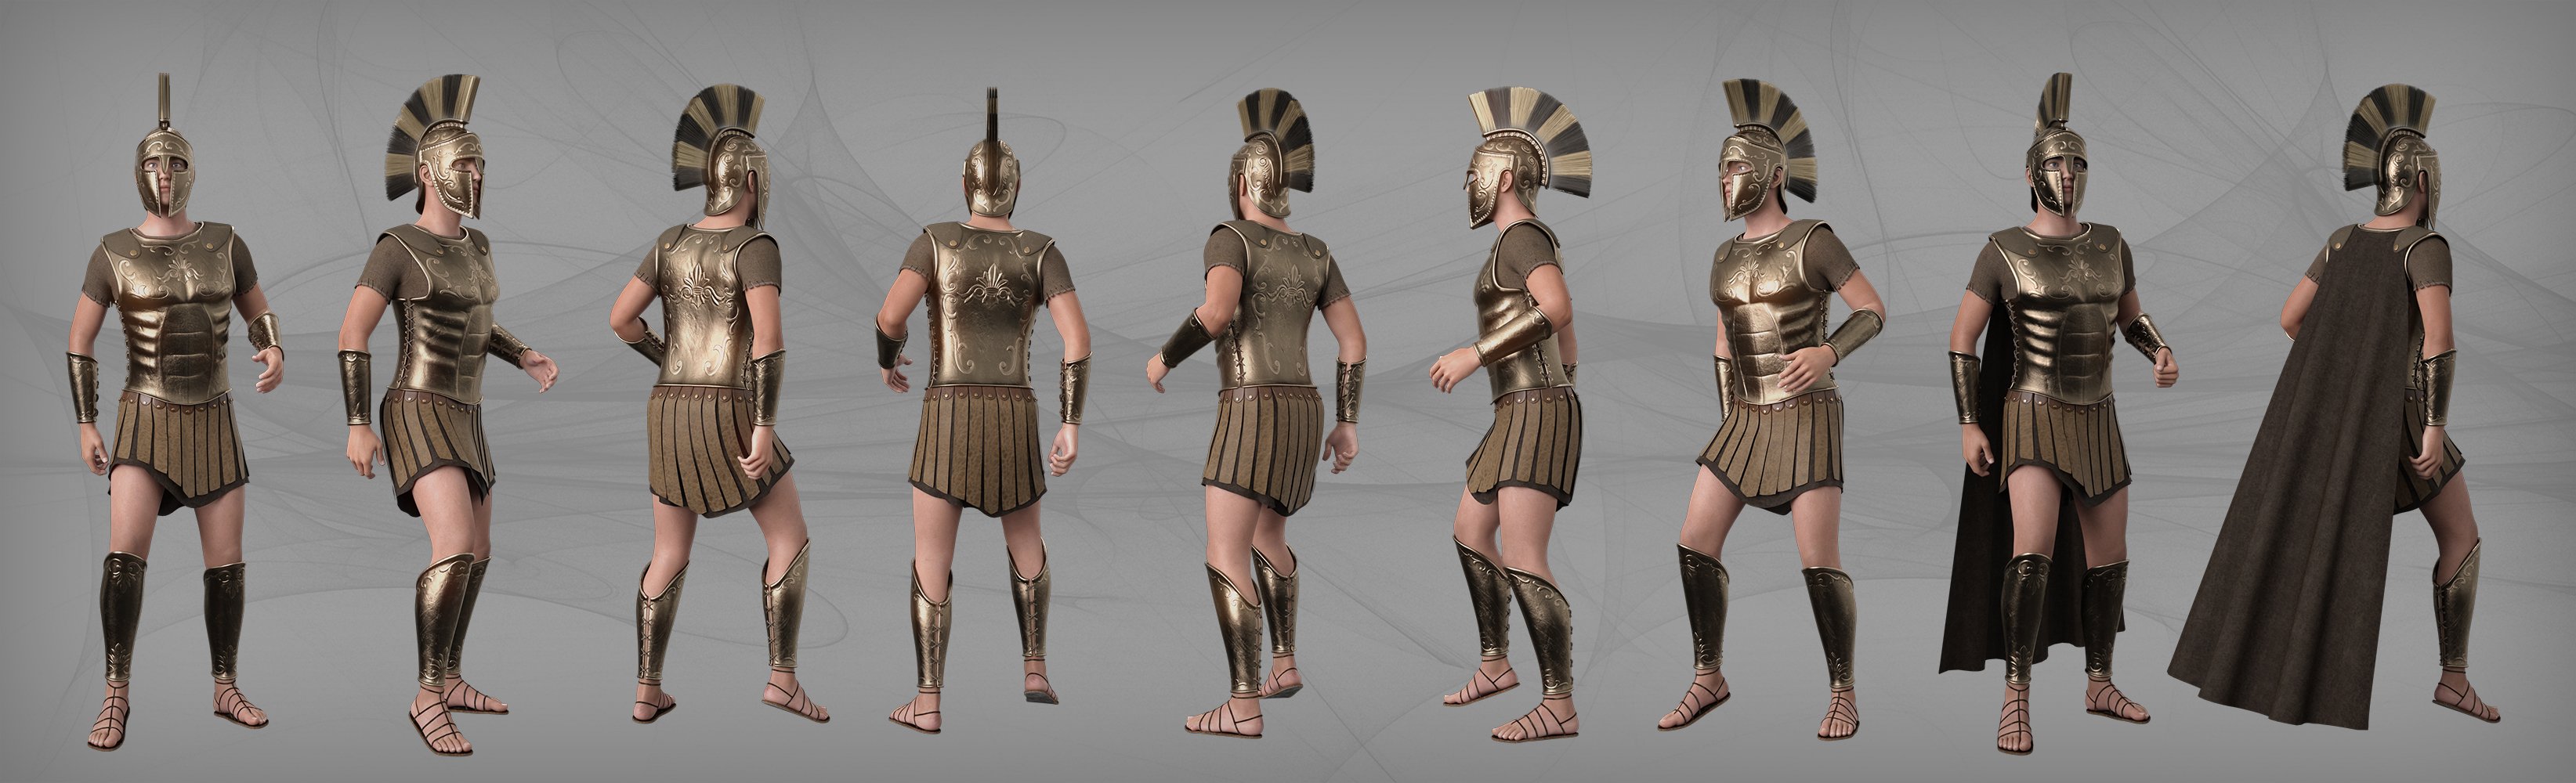 MD dForce Myrmidons Armor for Genesis 8 and 8.1 Males by: MikeD, 3D Models by Daz 3D